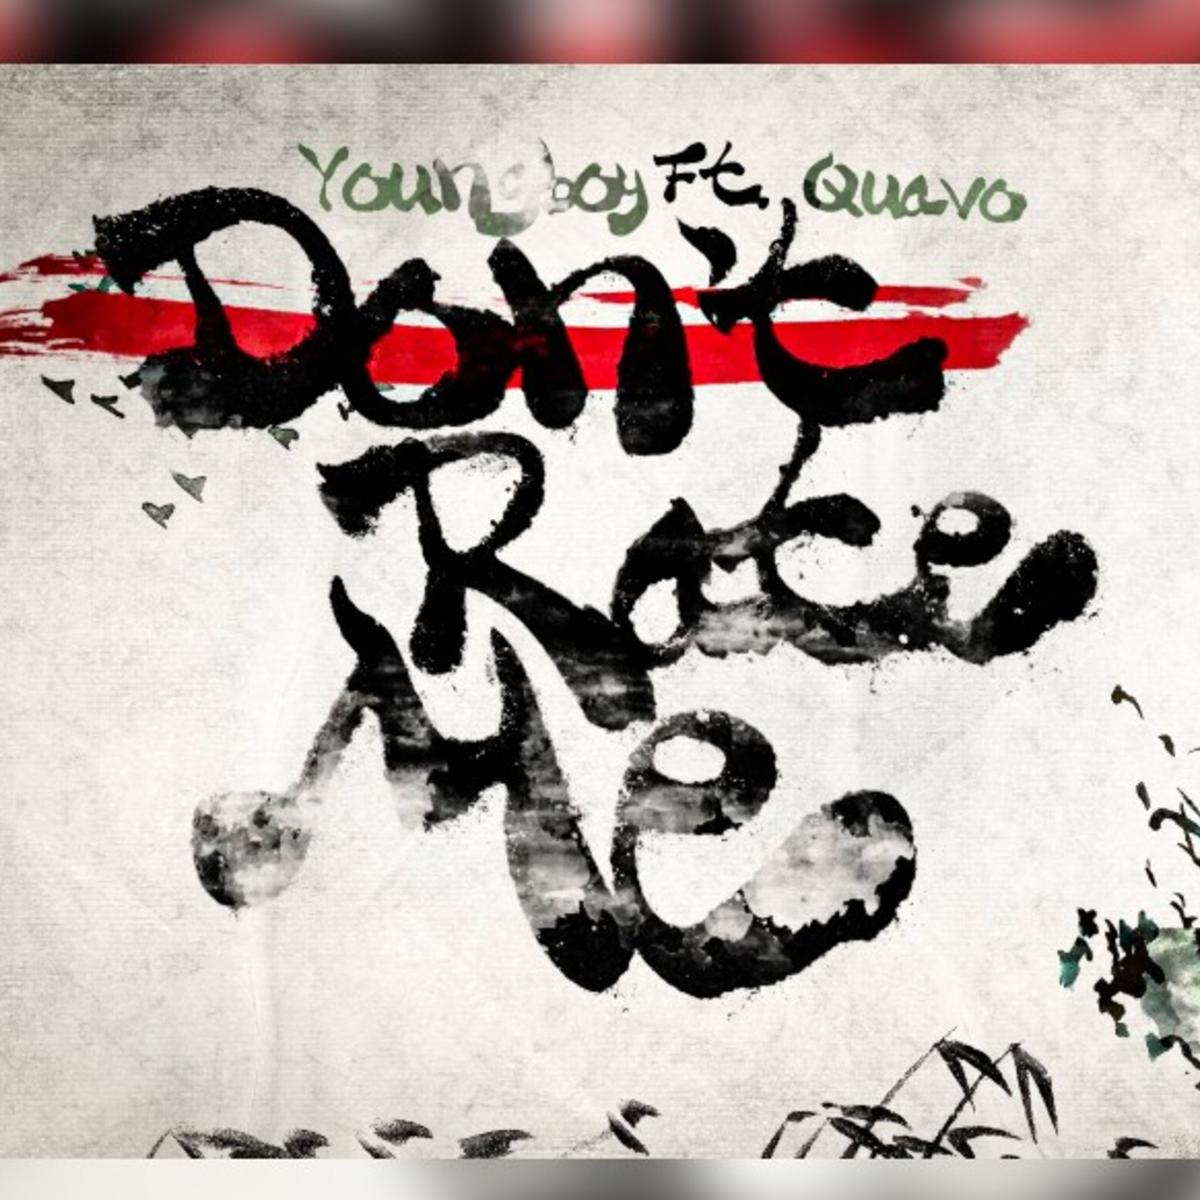 NBA YoungBoy & Quavo Join Forces For “Don’t Rate Me”